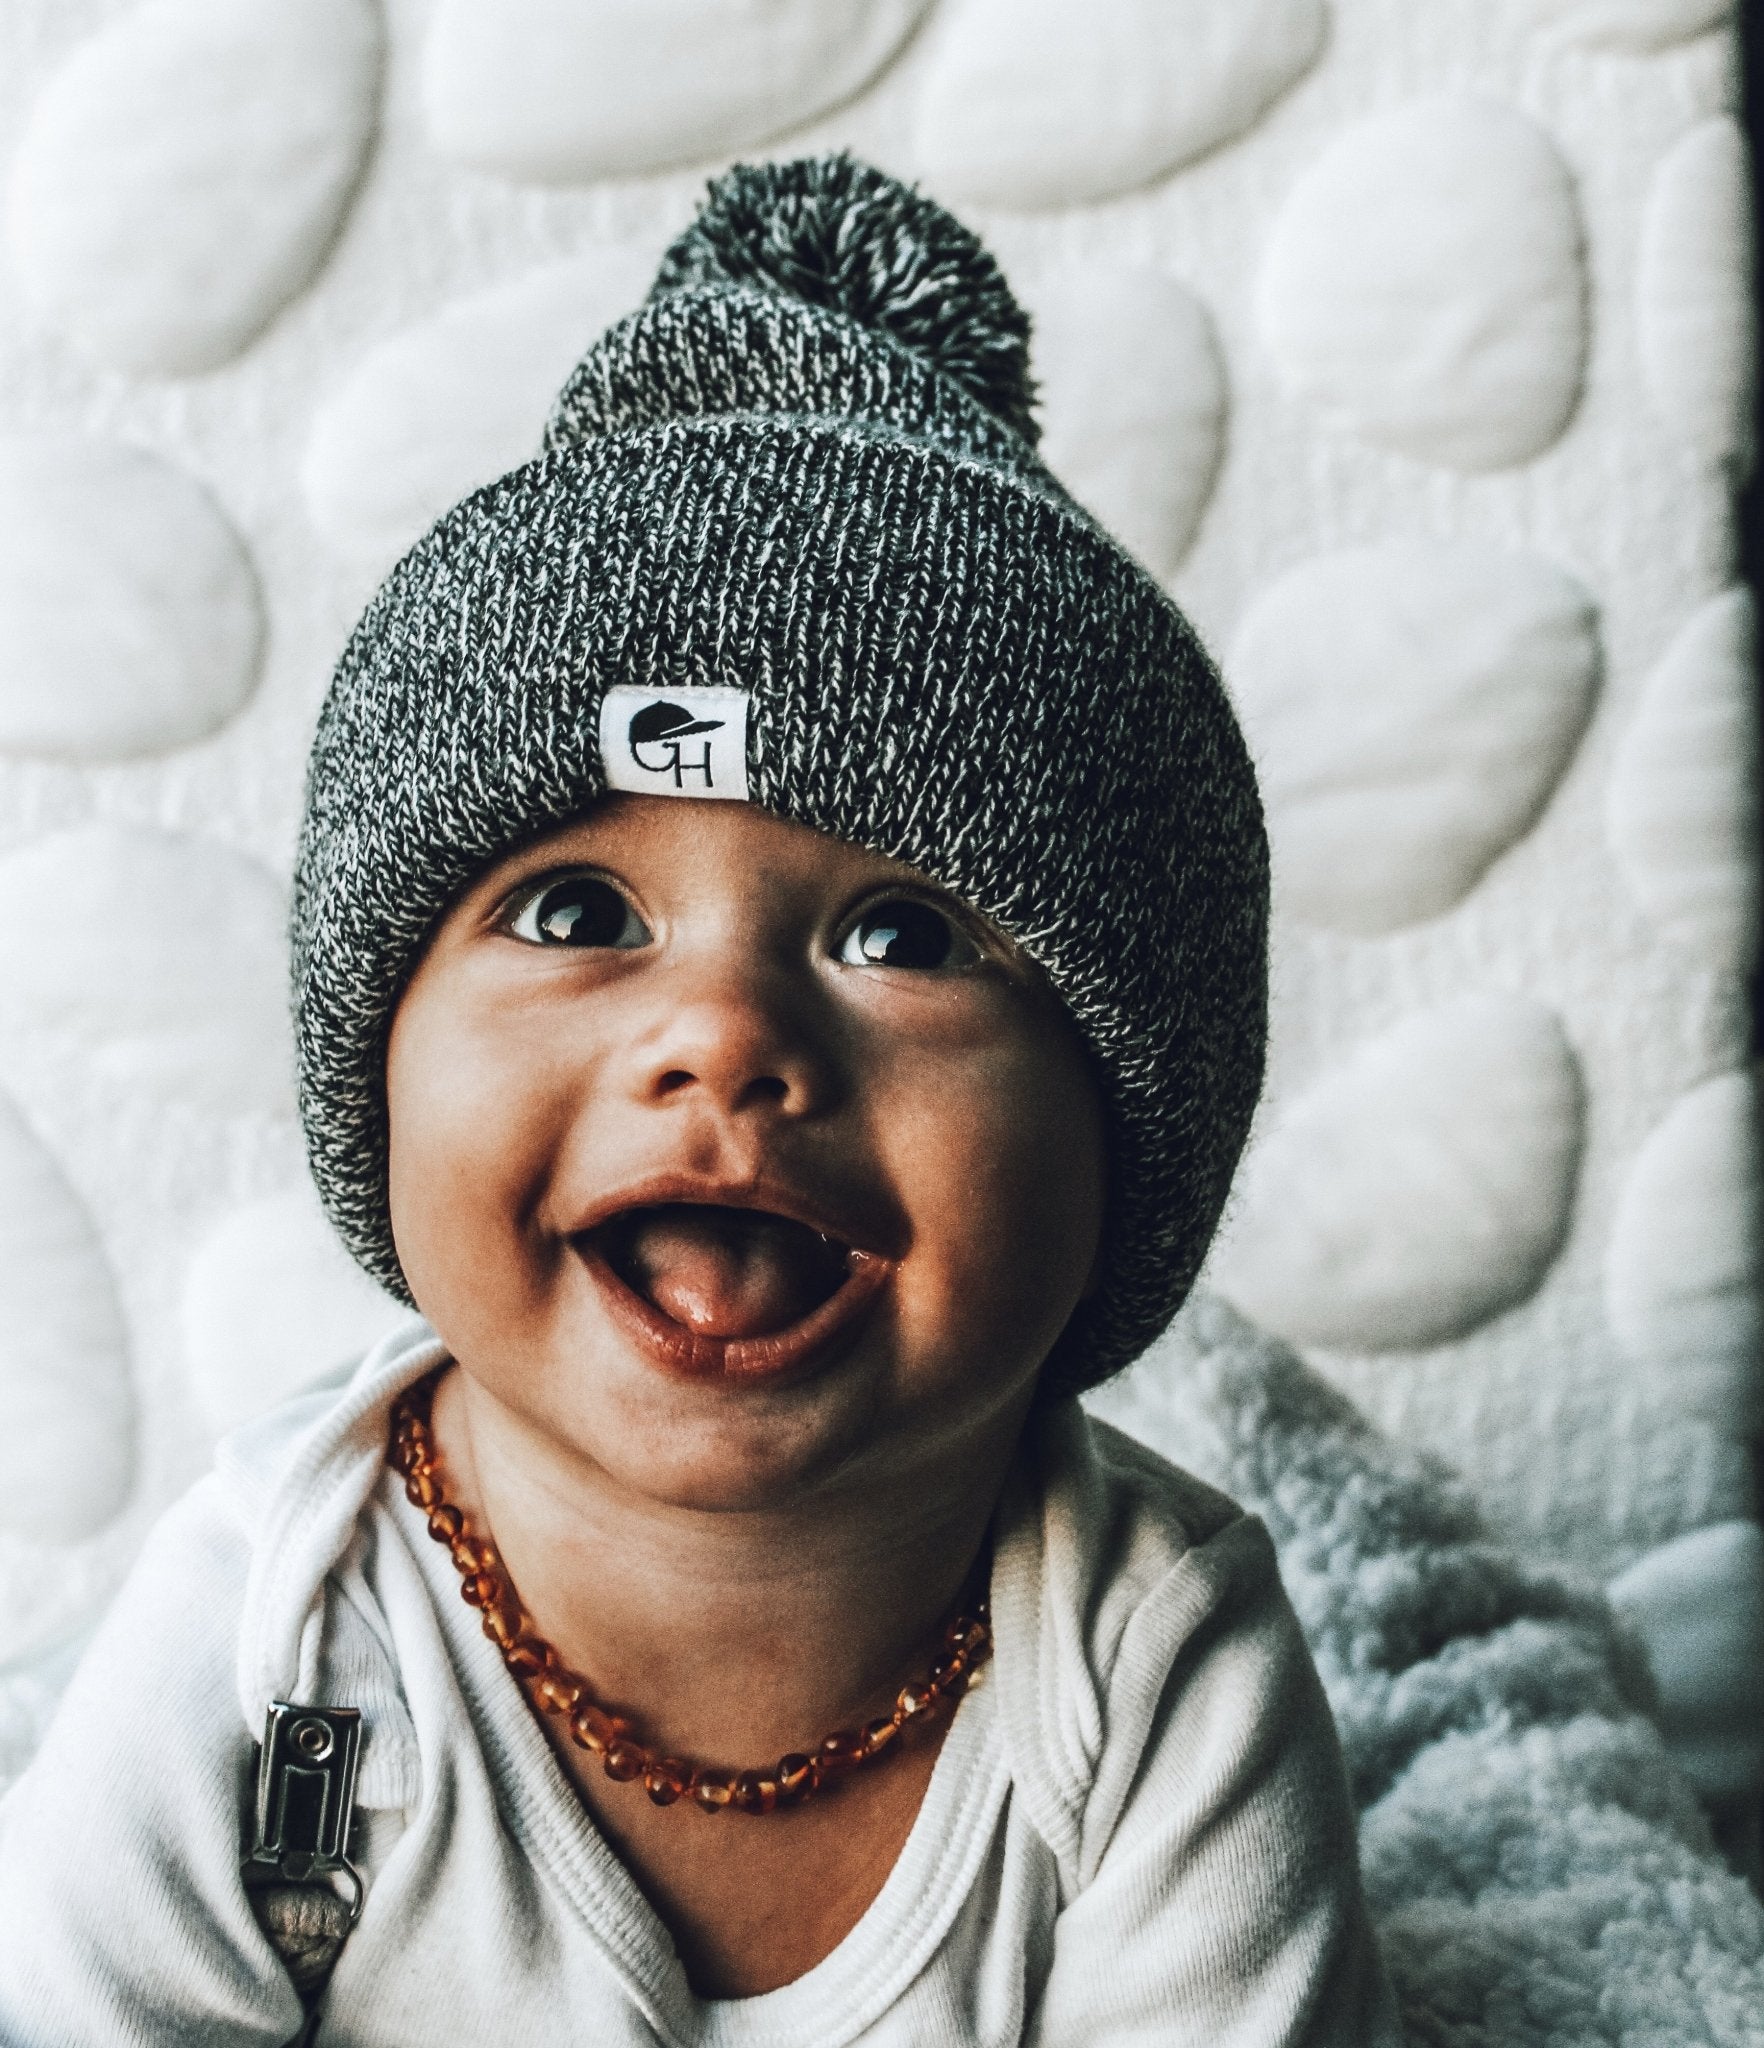 image of smiling toddler looking up towards the camera wearing the Black Marled Pom Beanie - George Hats baby beanie hat